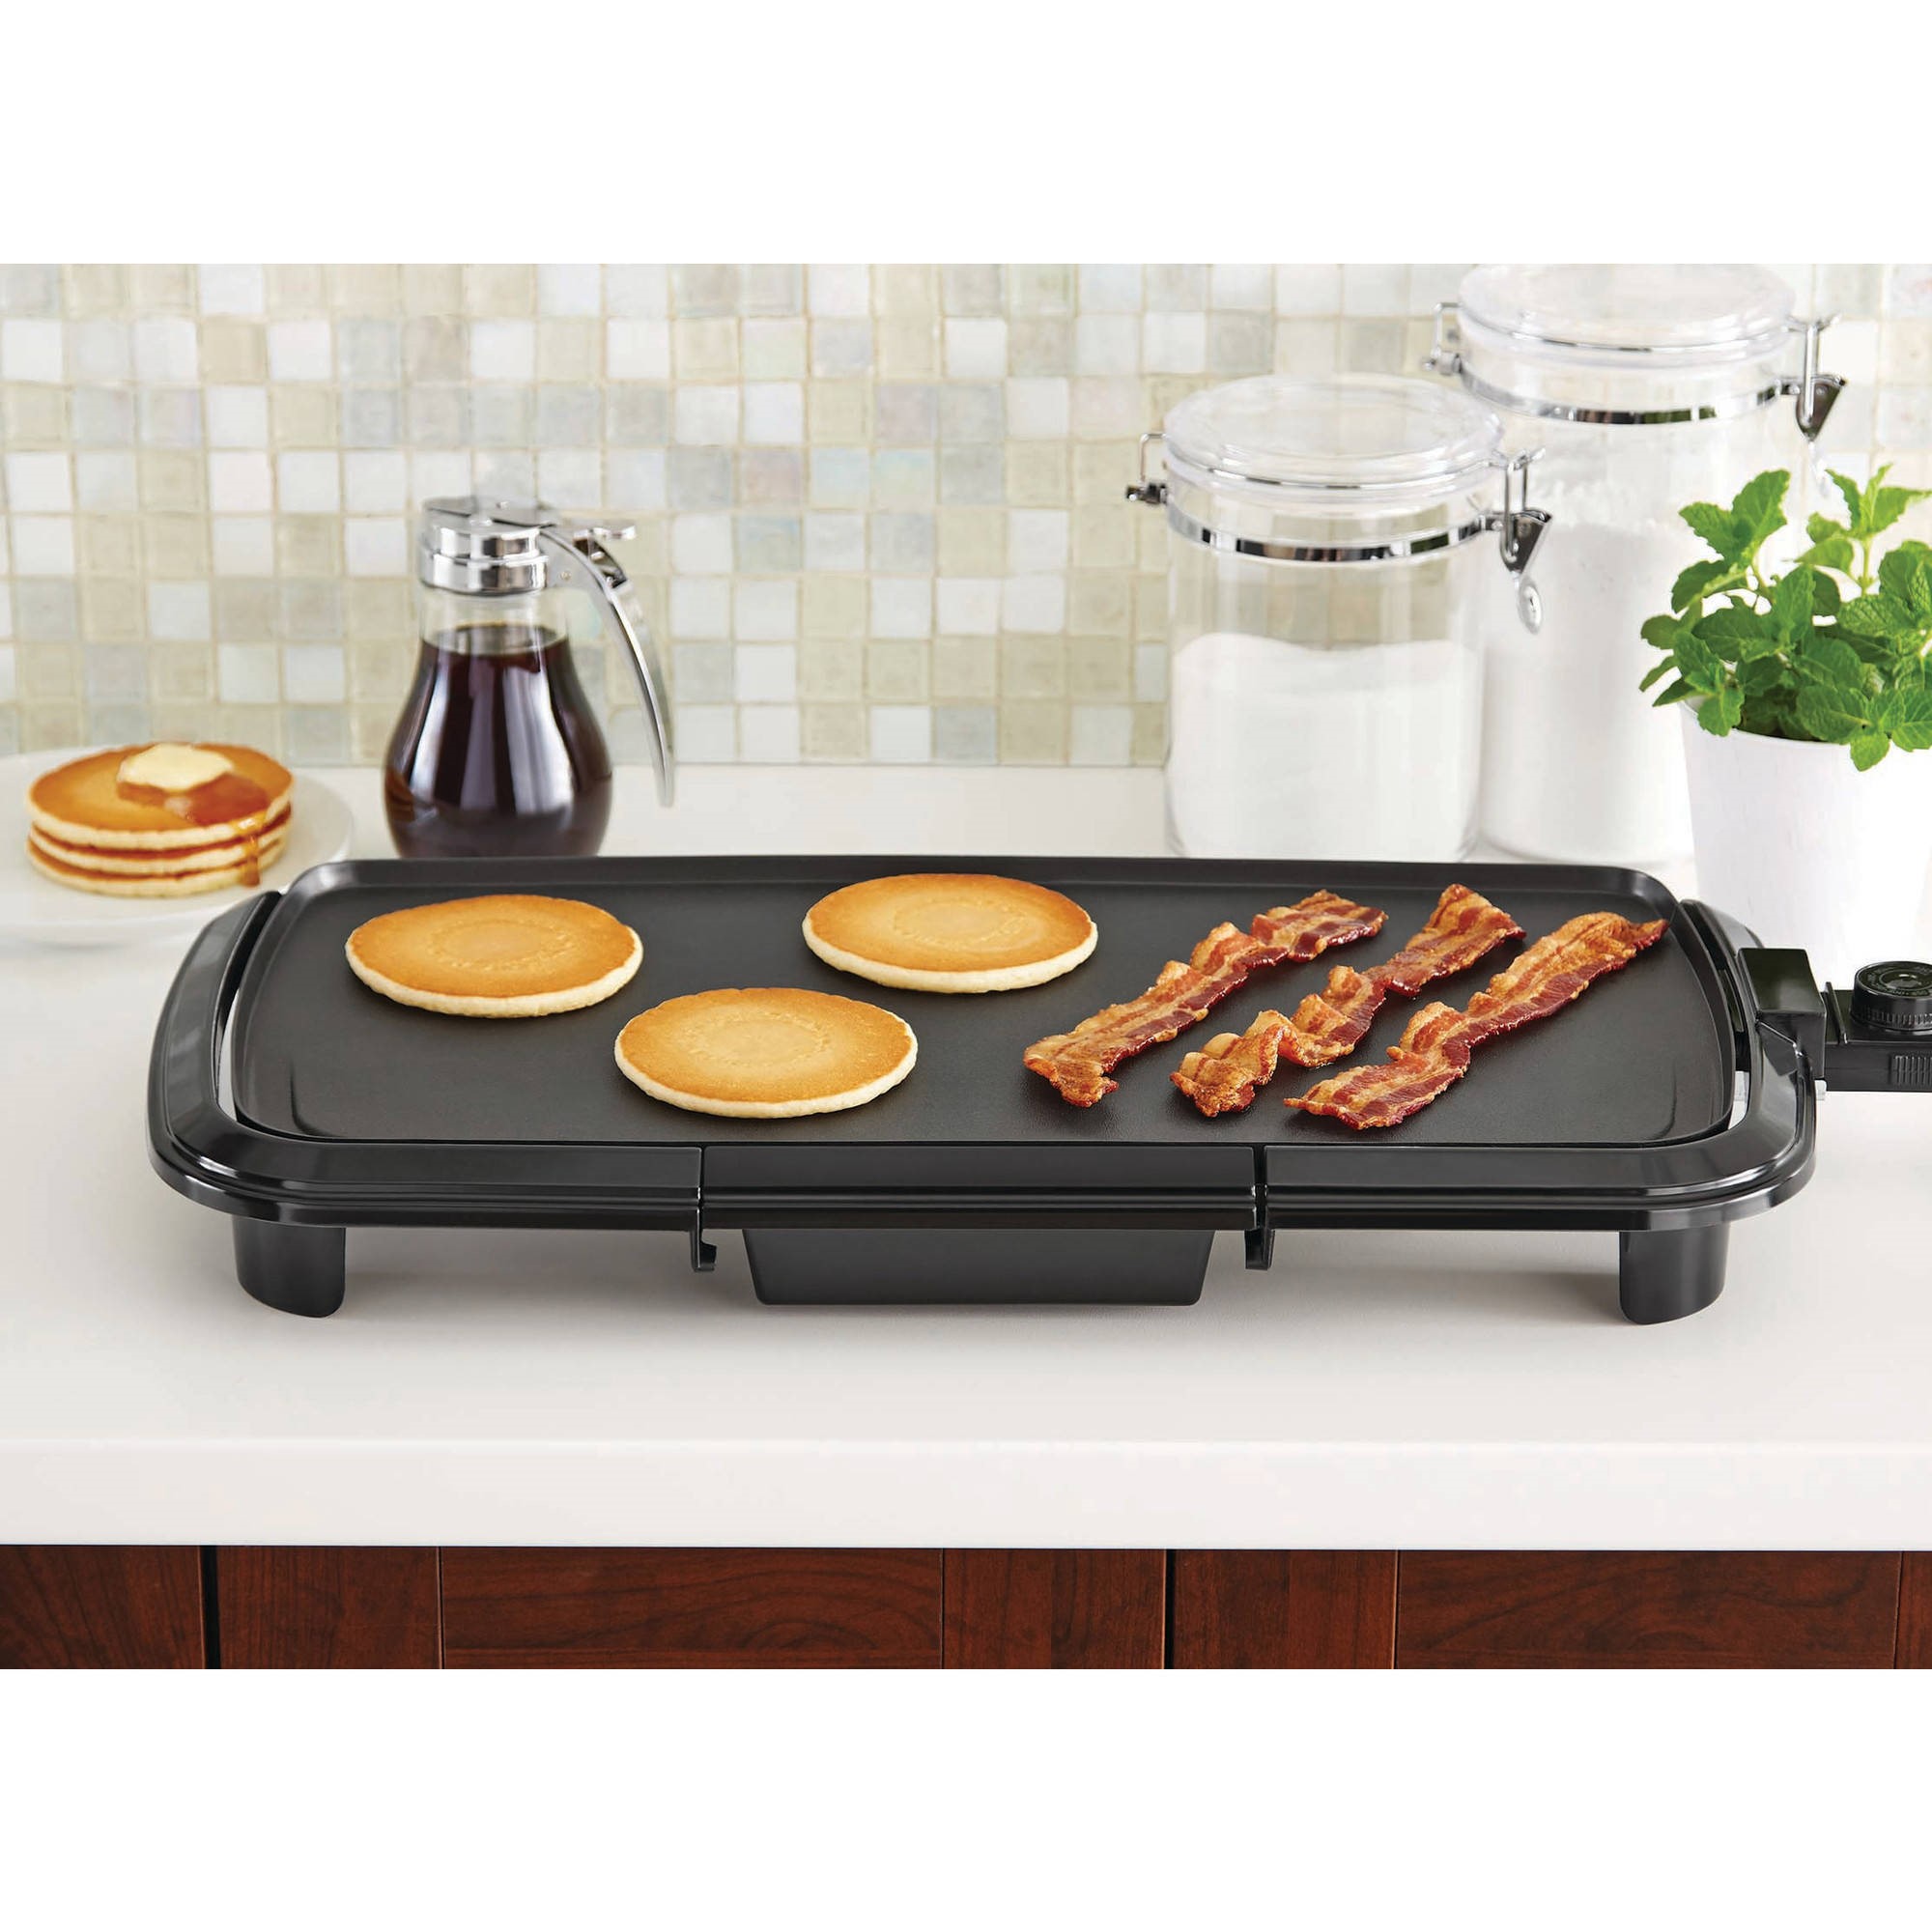 Mainstays electric griddle for $12